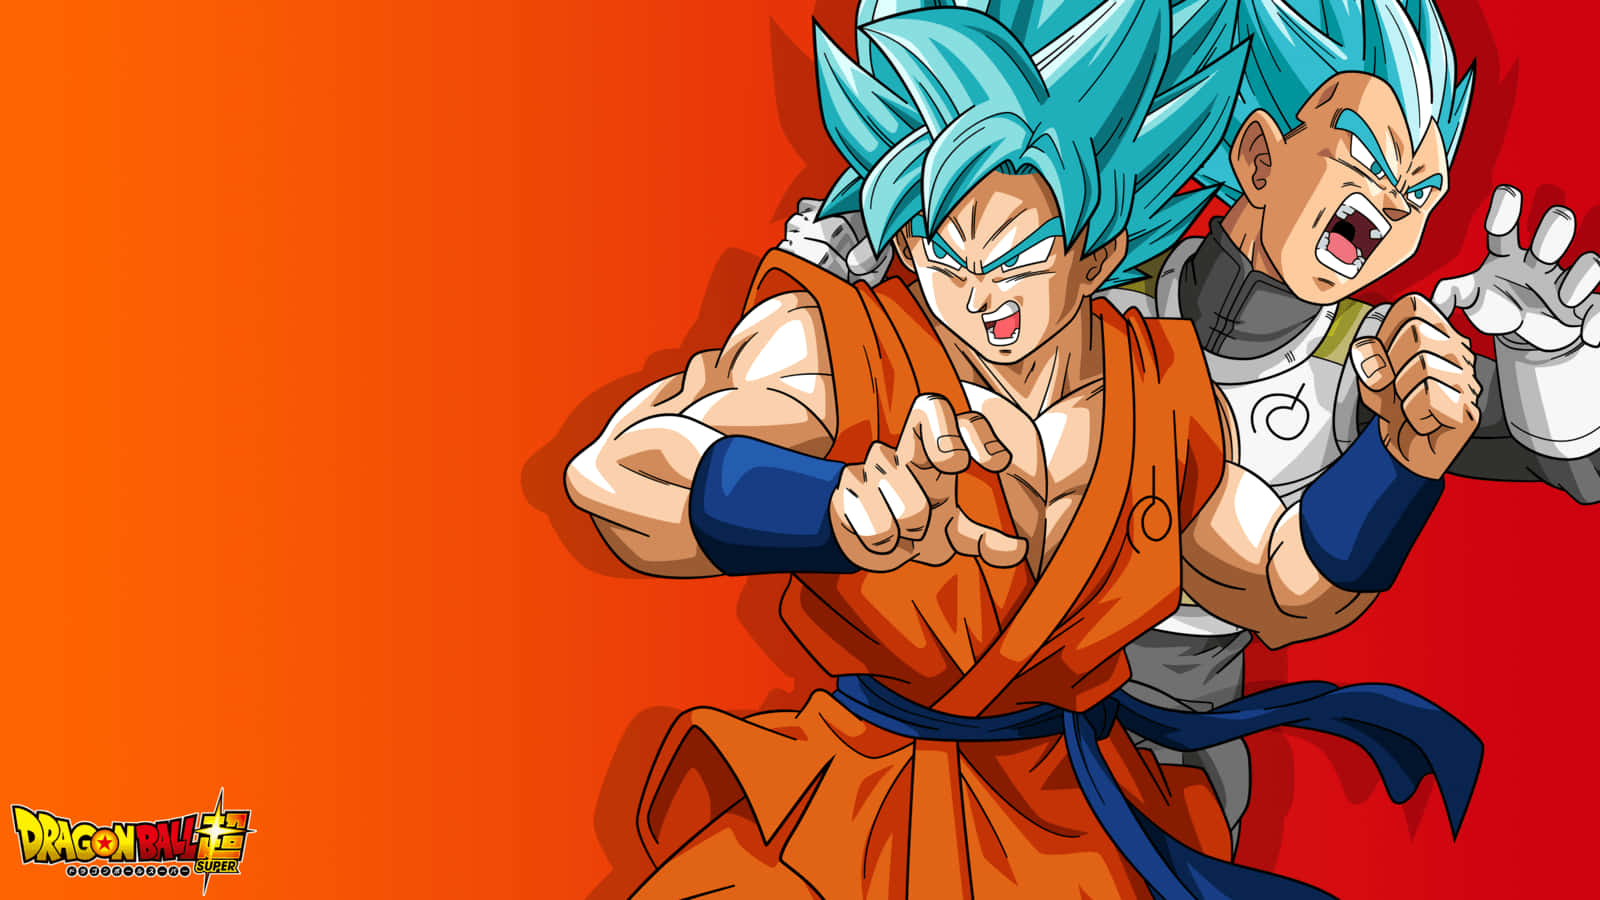 "Rise up and join the fight! Super Dragon Ball is here!" Wallpaper